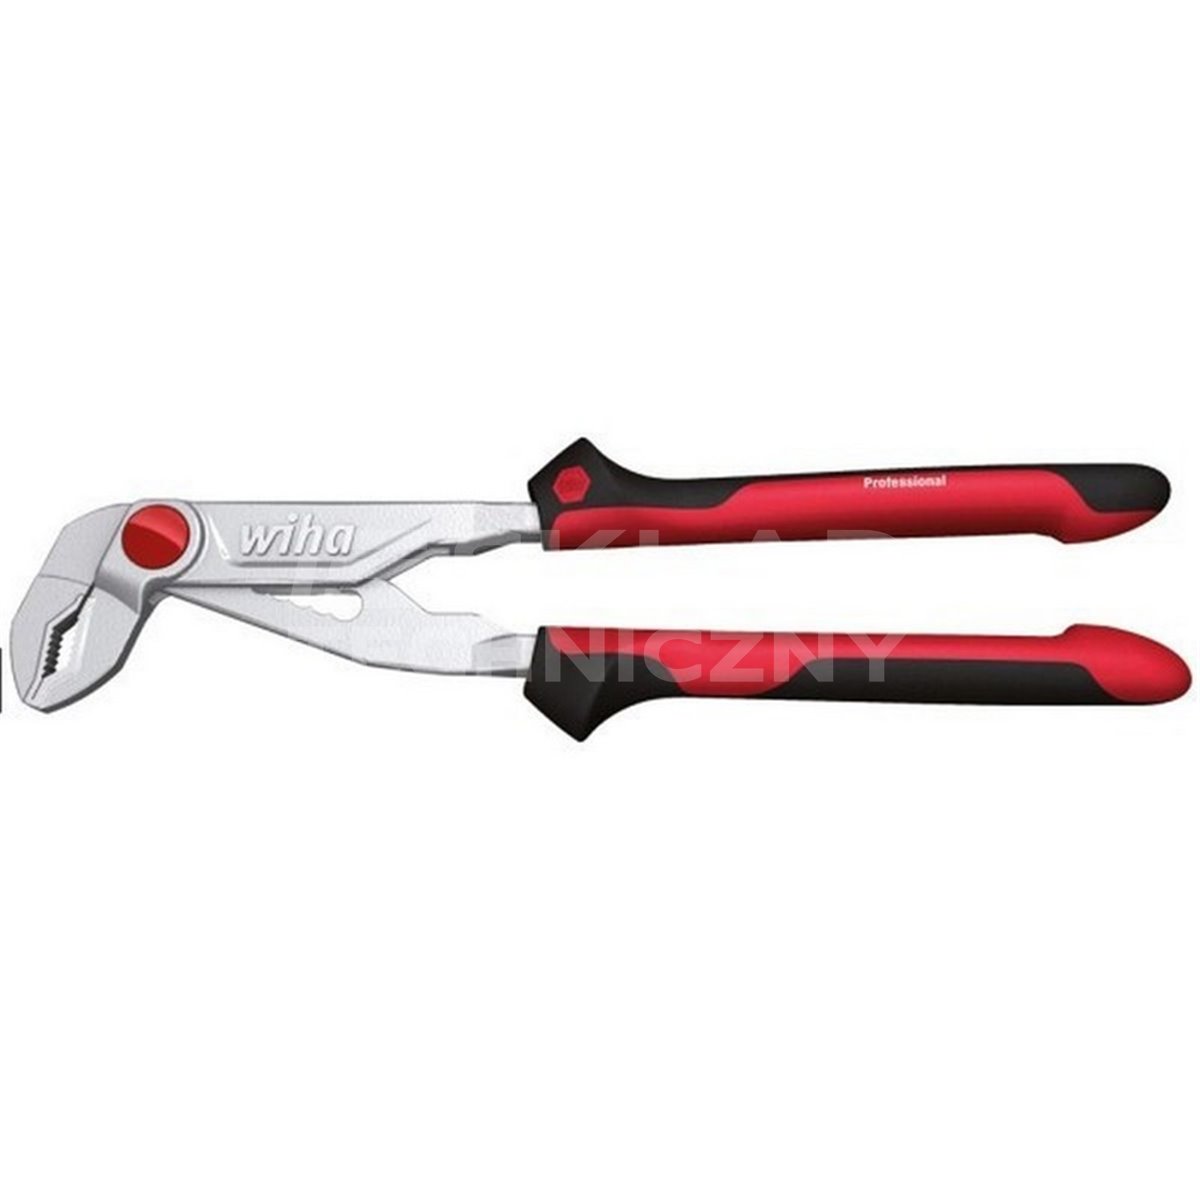 Adjustable pliers with Professional Z22005 button 250mm Wiha 26766.